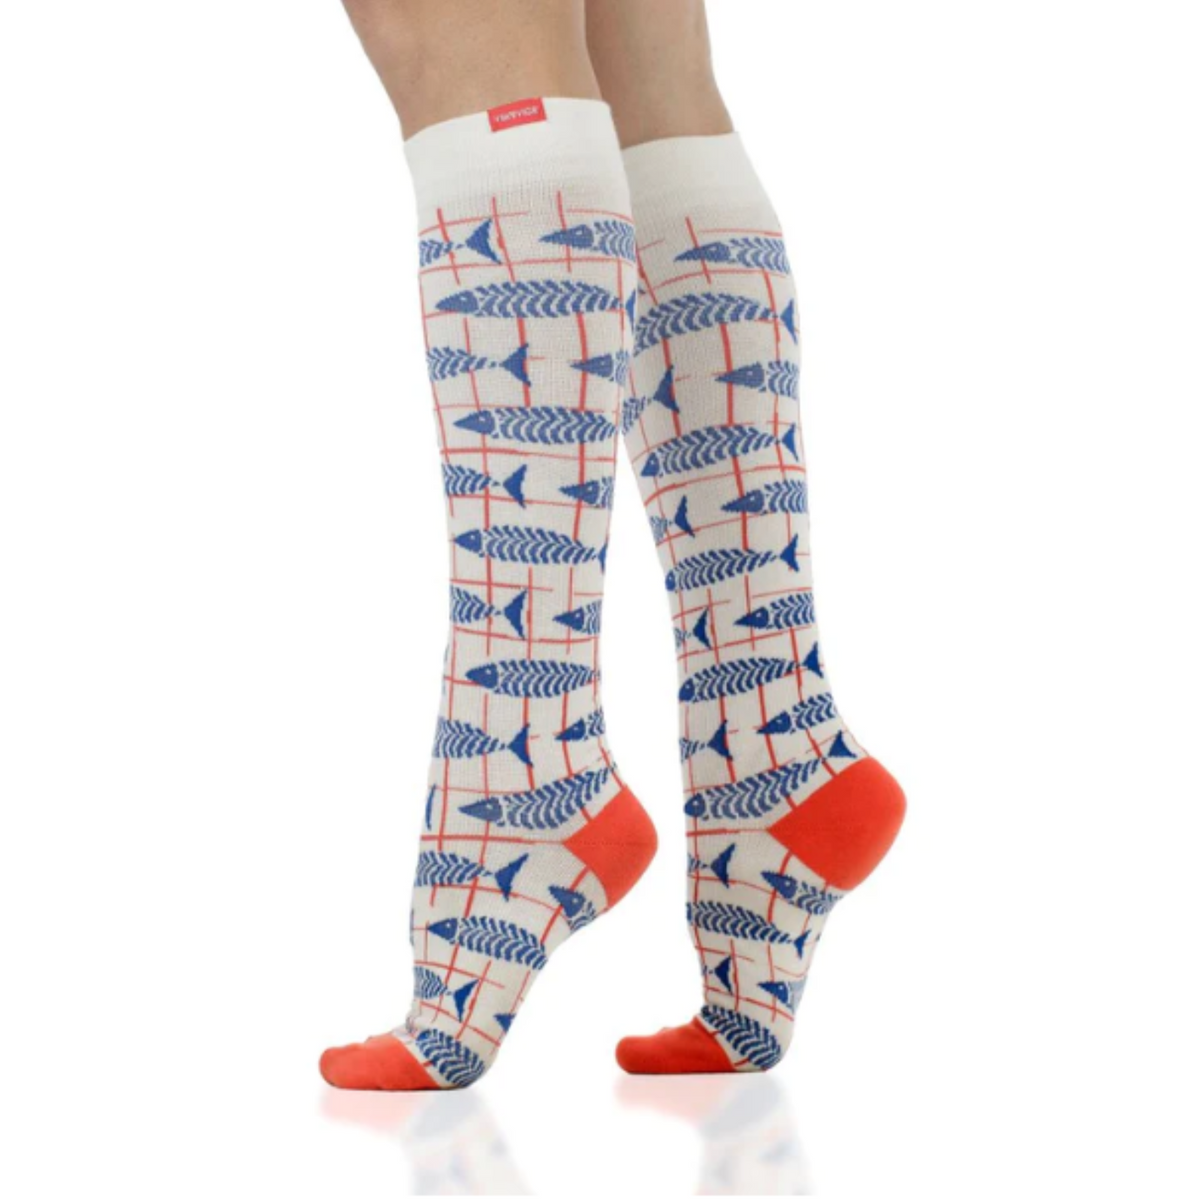 Vim &amp; Vigr Bone Fish moderate graduated compression (15-20 mmHg) women&#39;s and men&#39;s sock featuring knee high white sock with blue fish worn by model